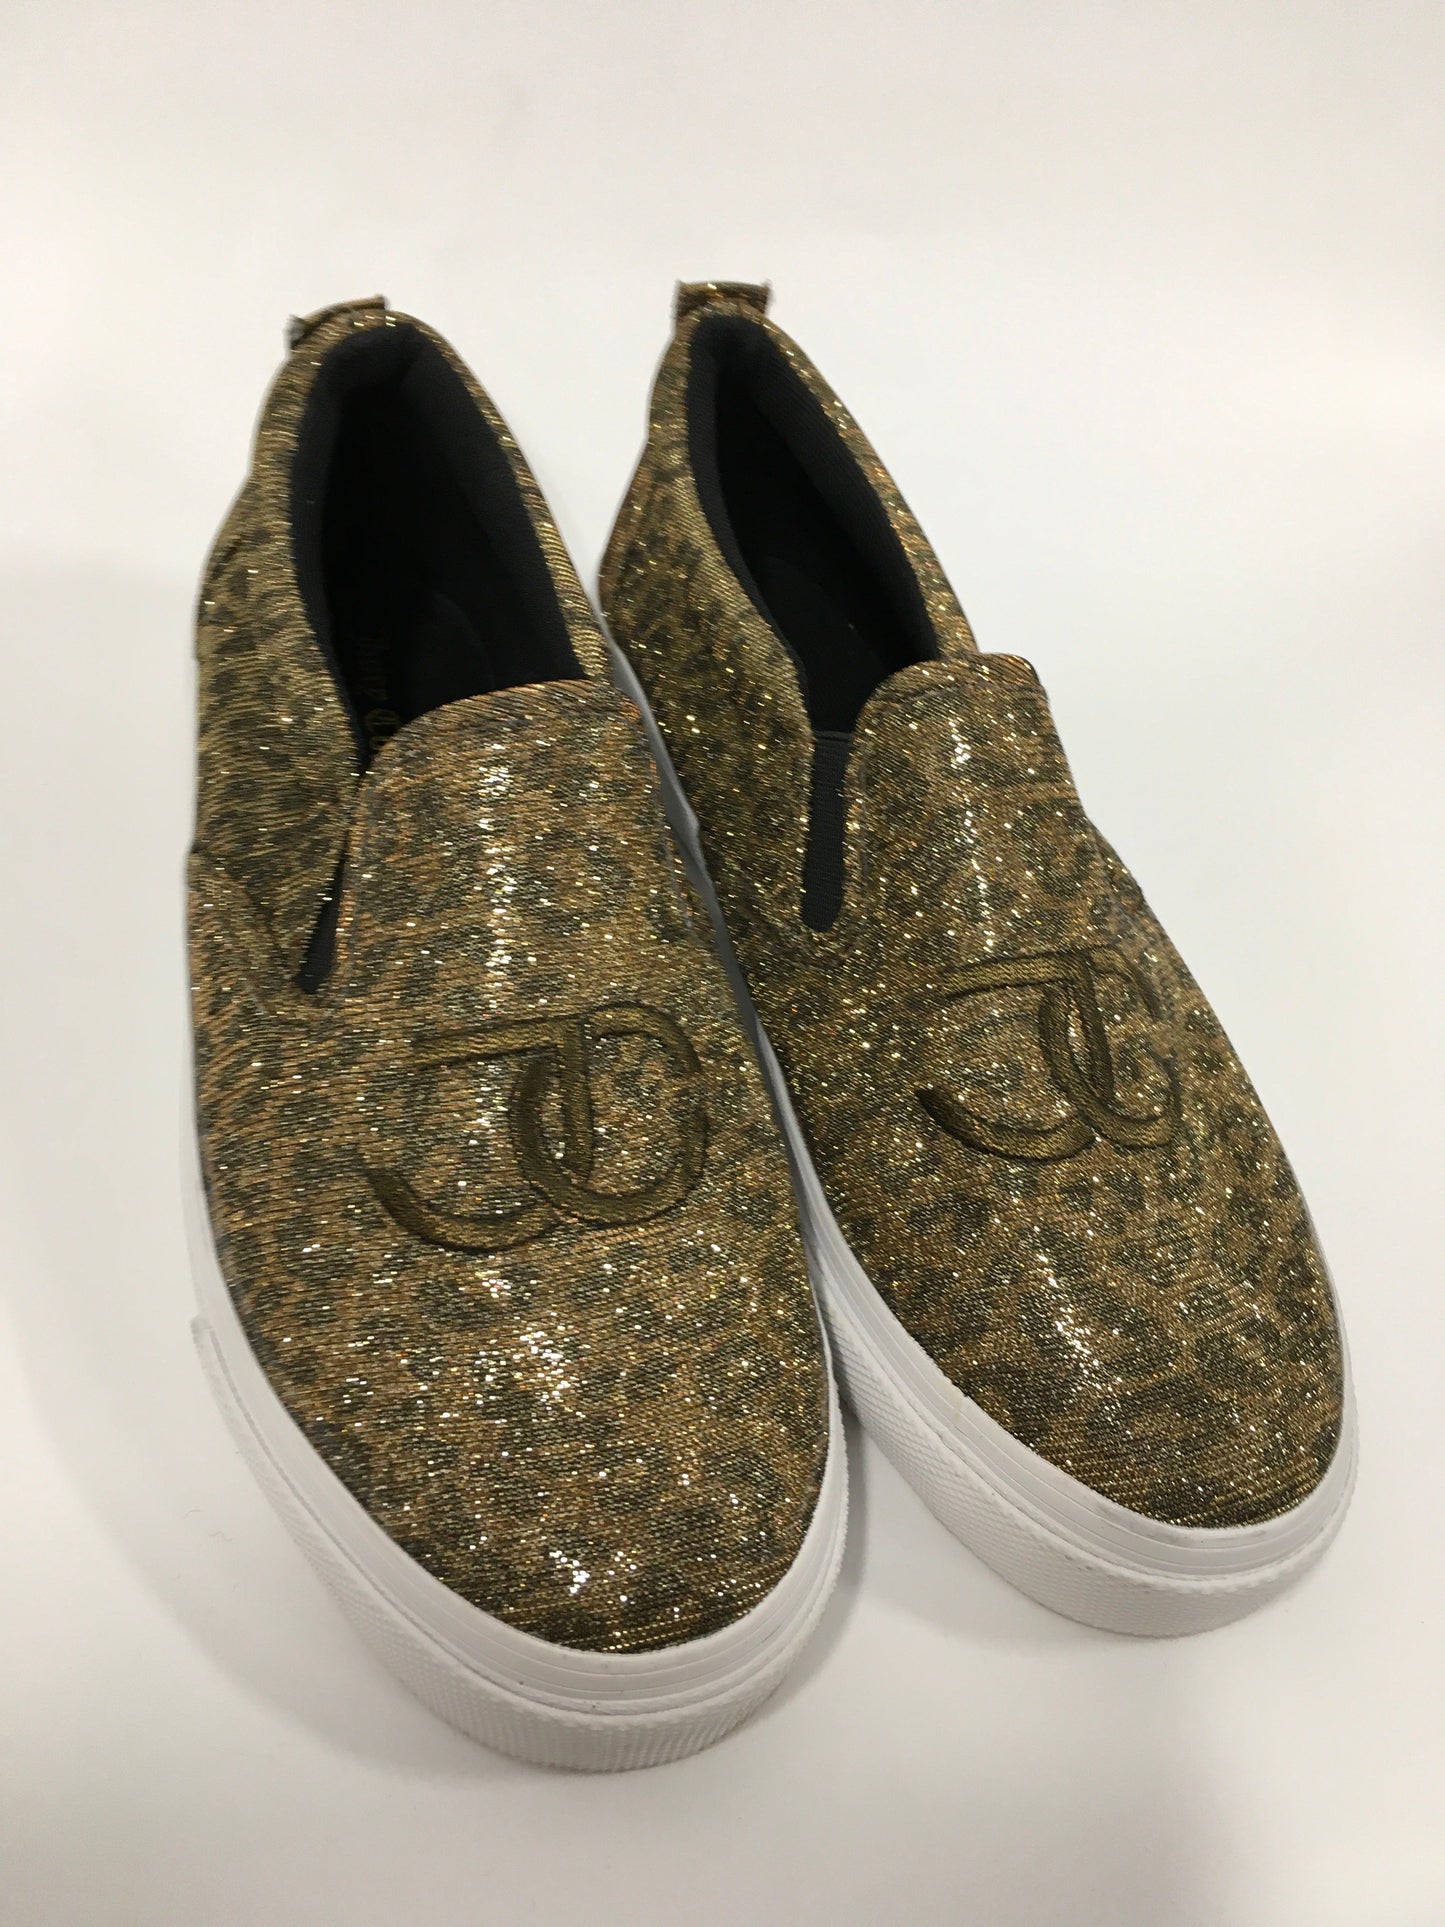 Shoes Flats Boat By Juicy Couture  Size: 8.5